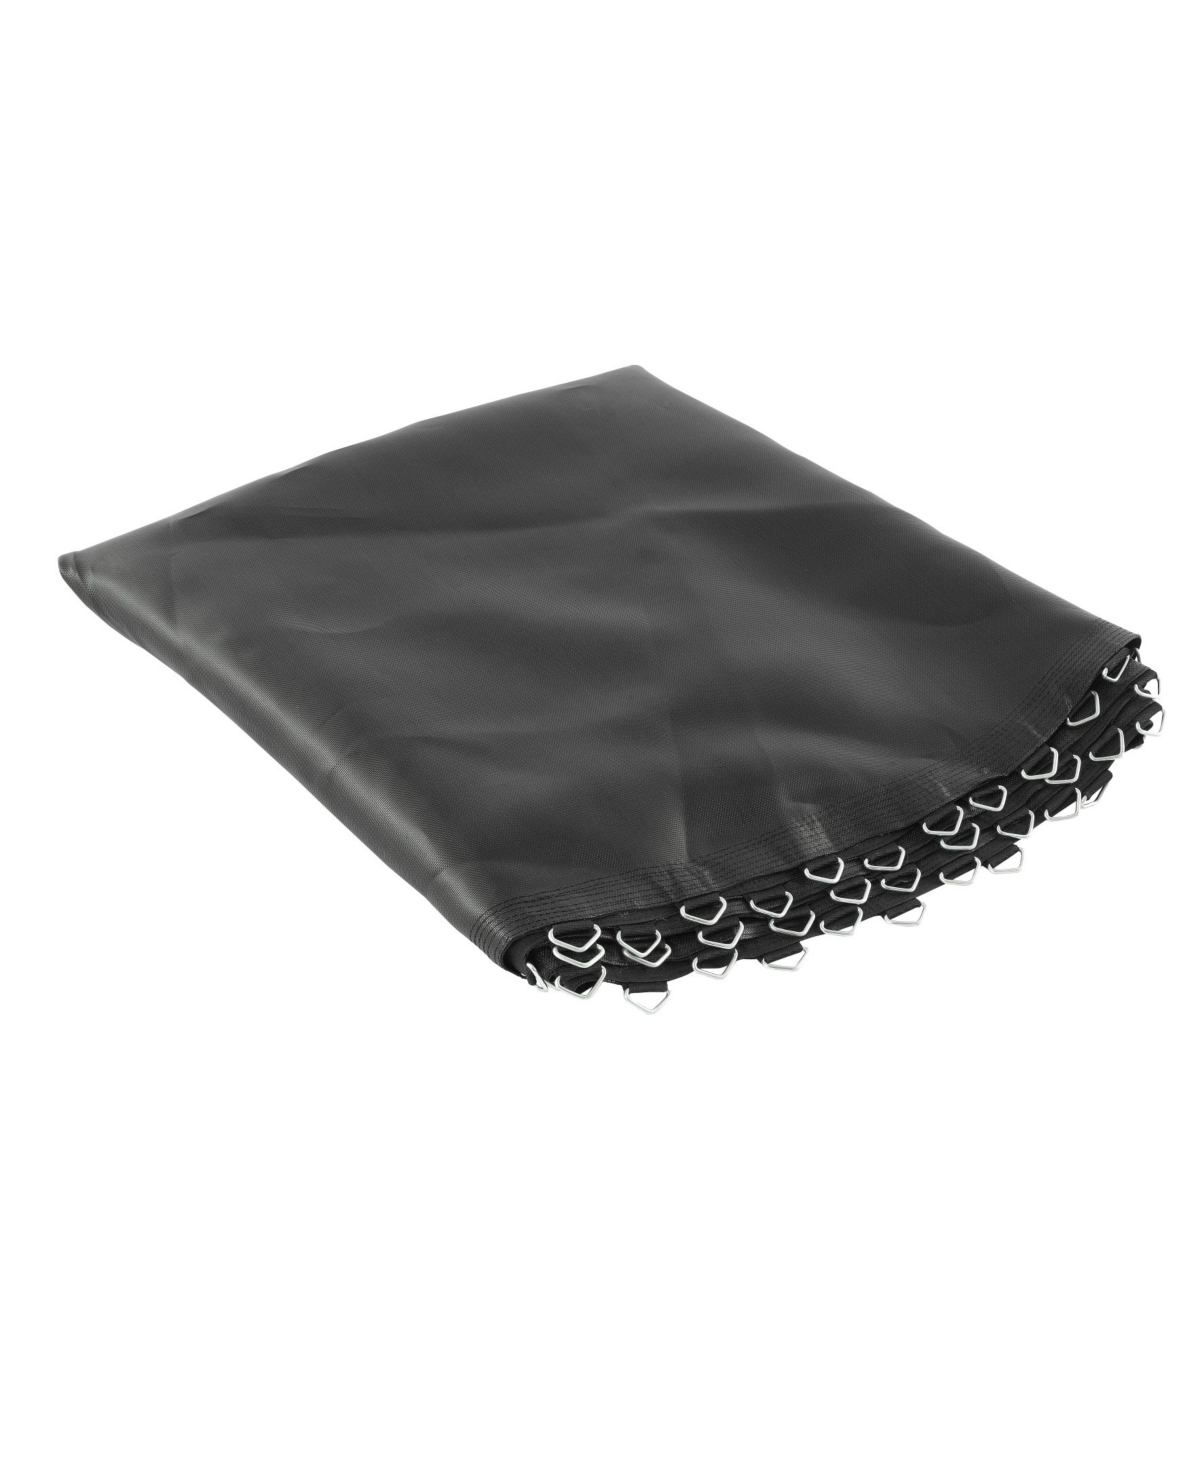 Upperbounce Trampoline Replacement Jumping Mat, Fits For 8' Round In Black